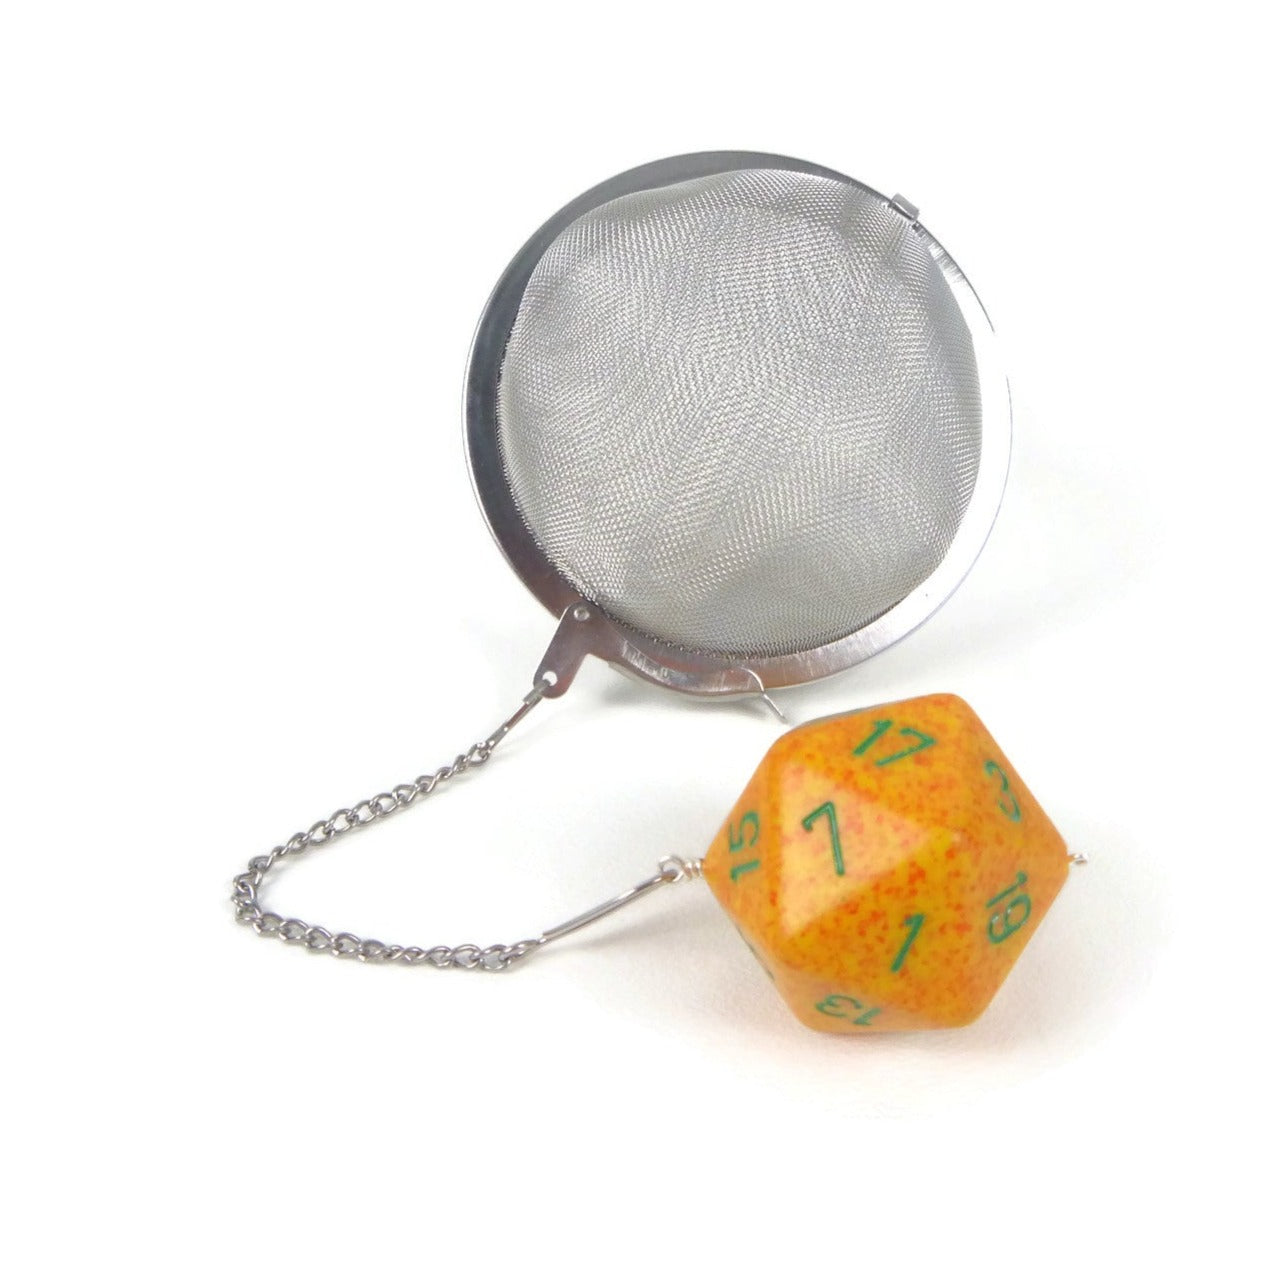 3 Inch Tea Infuser Ball with Large d20 - Speckled Lotus